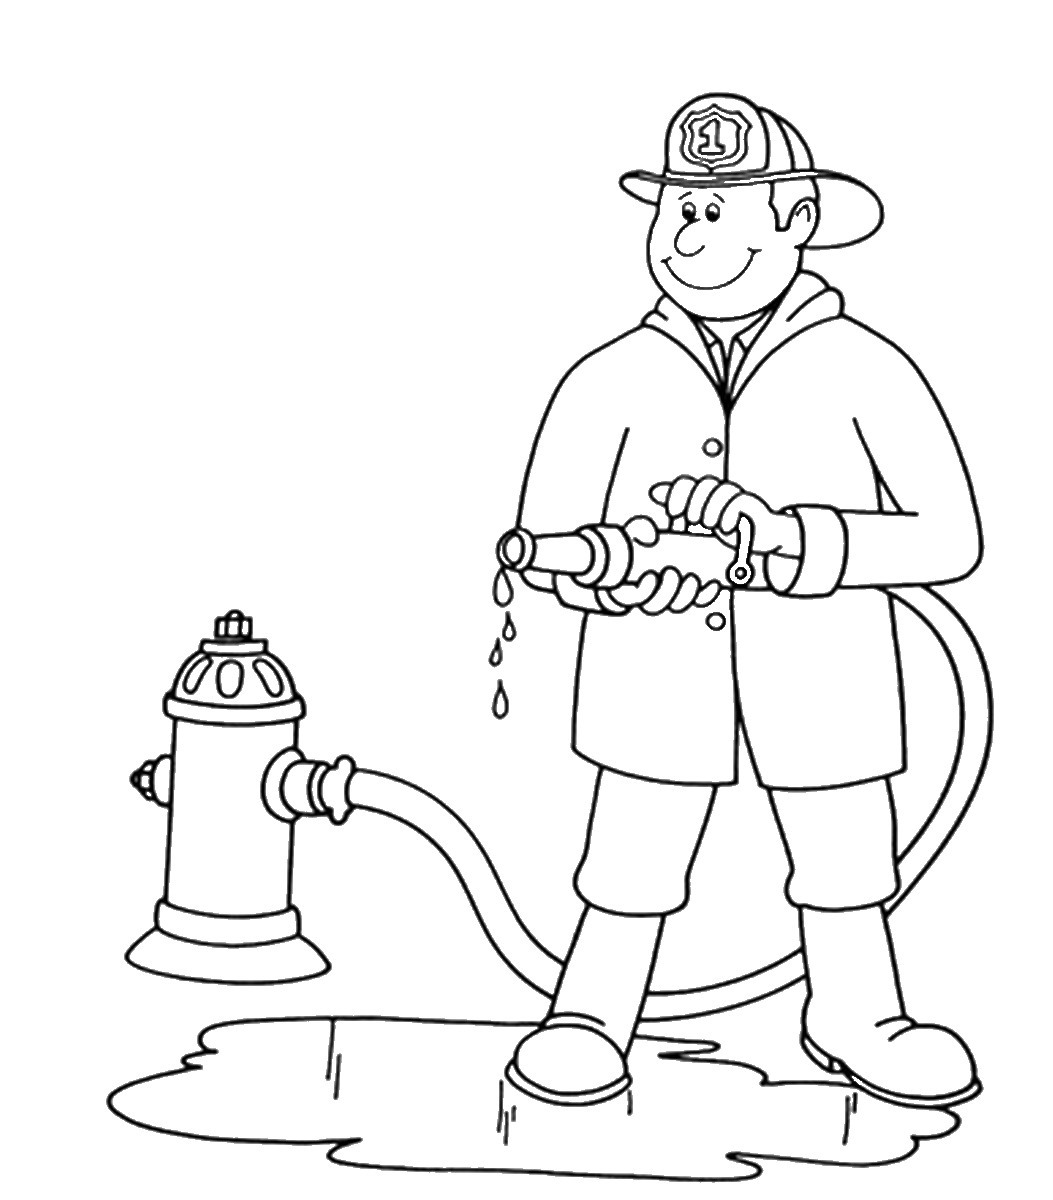 Free Firefighter Cliparts Black, Download Free Clip Art